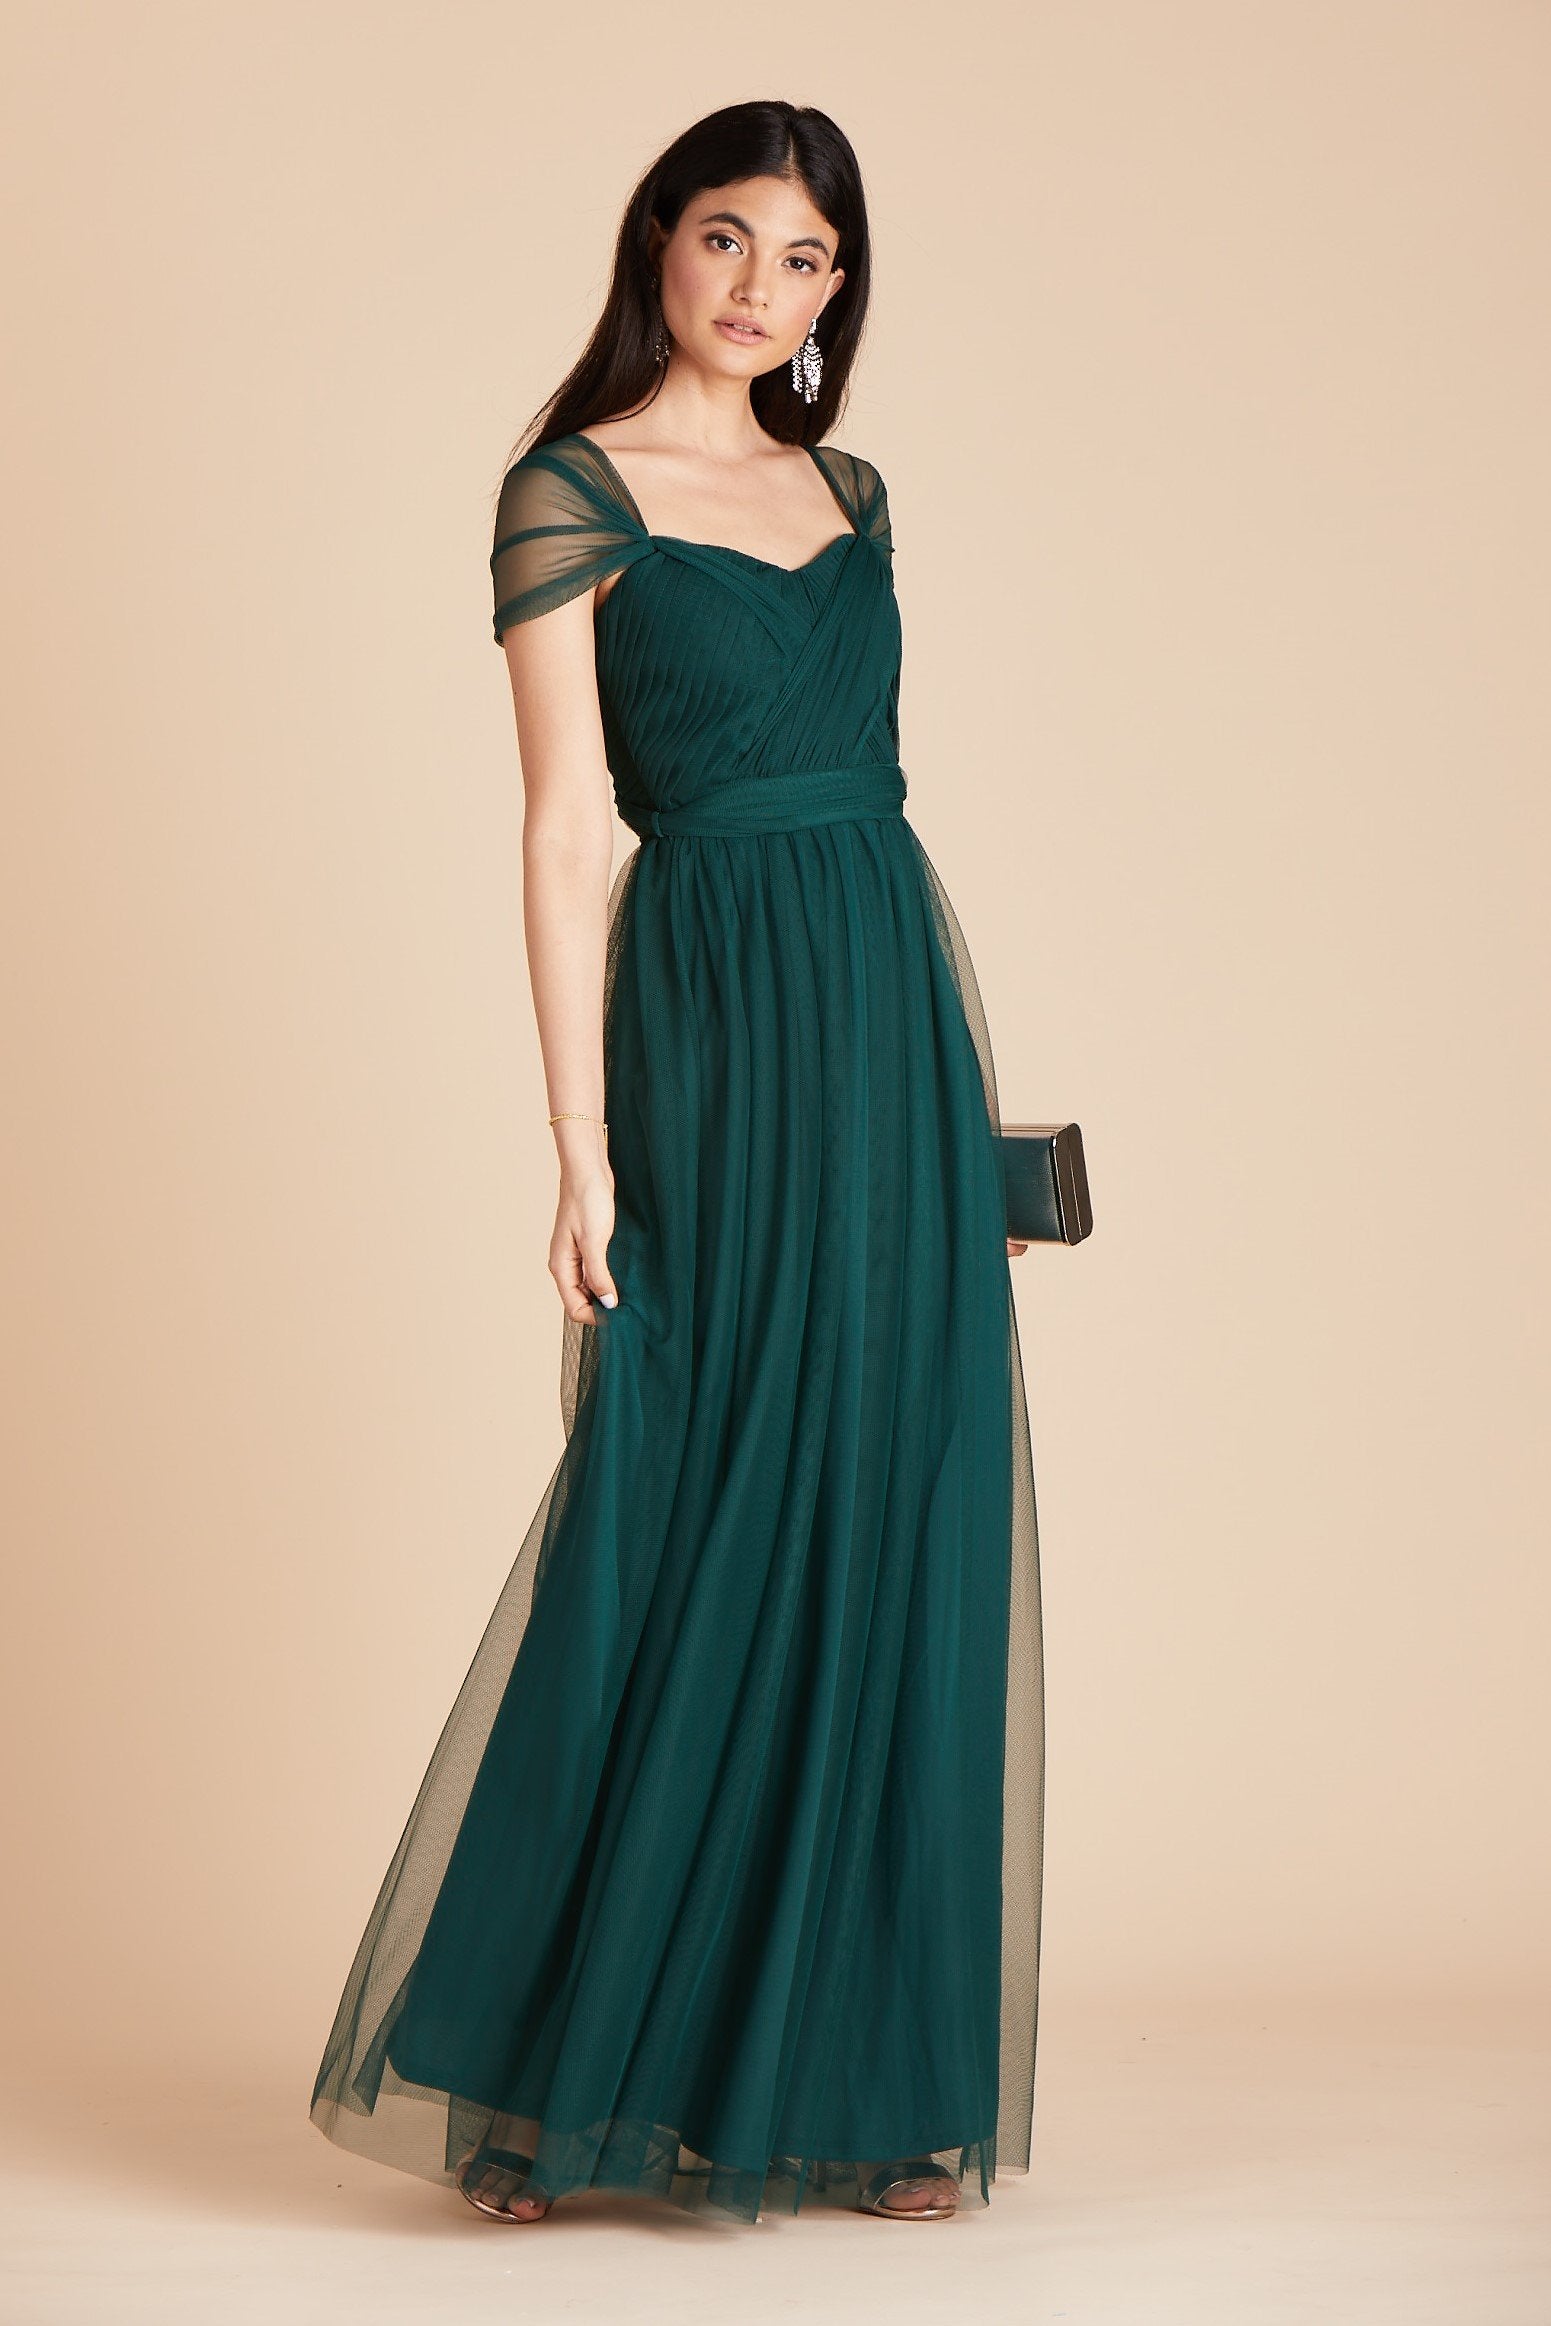 Christina convertible bridesmaid dress in emerald green tulle by Birdy Grey, side view